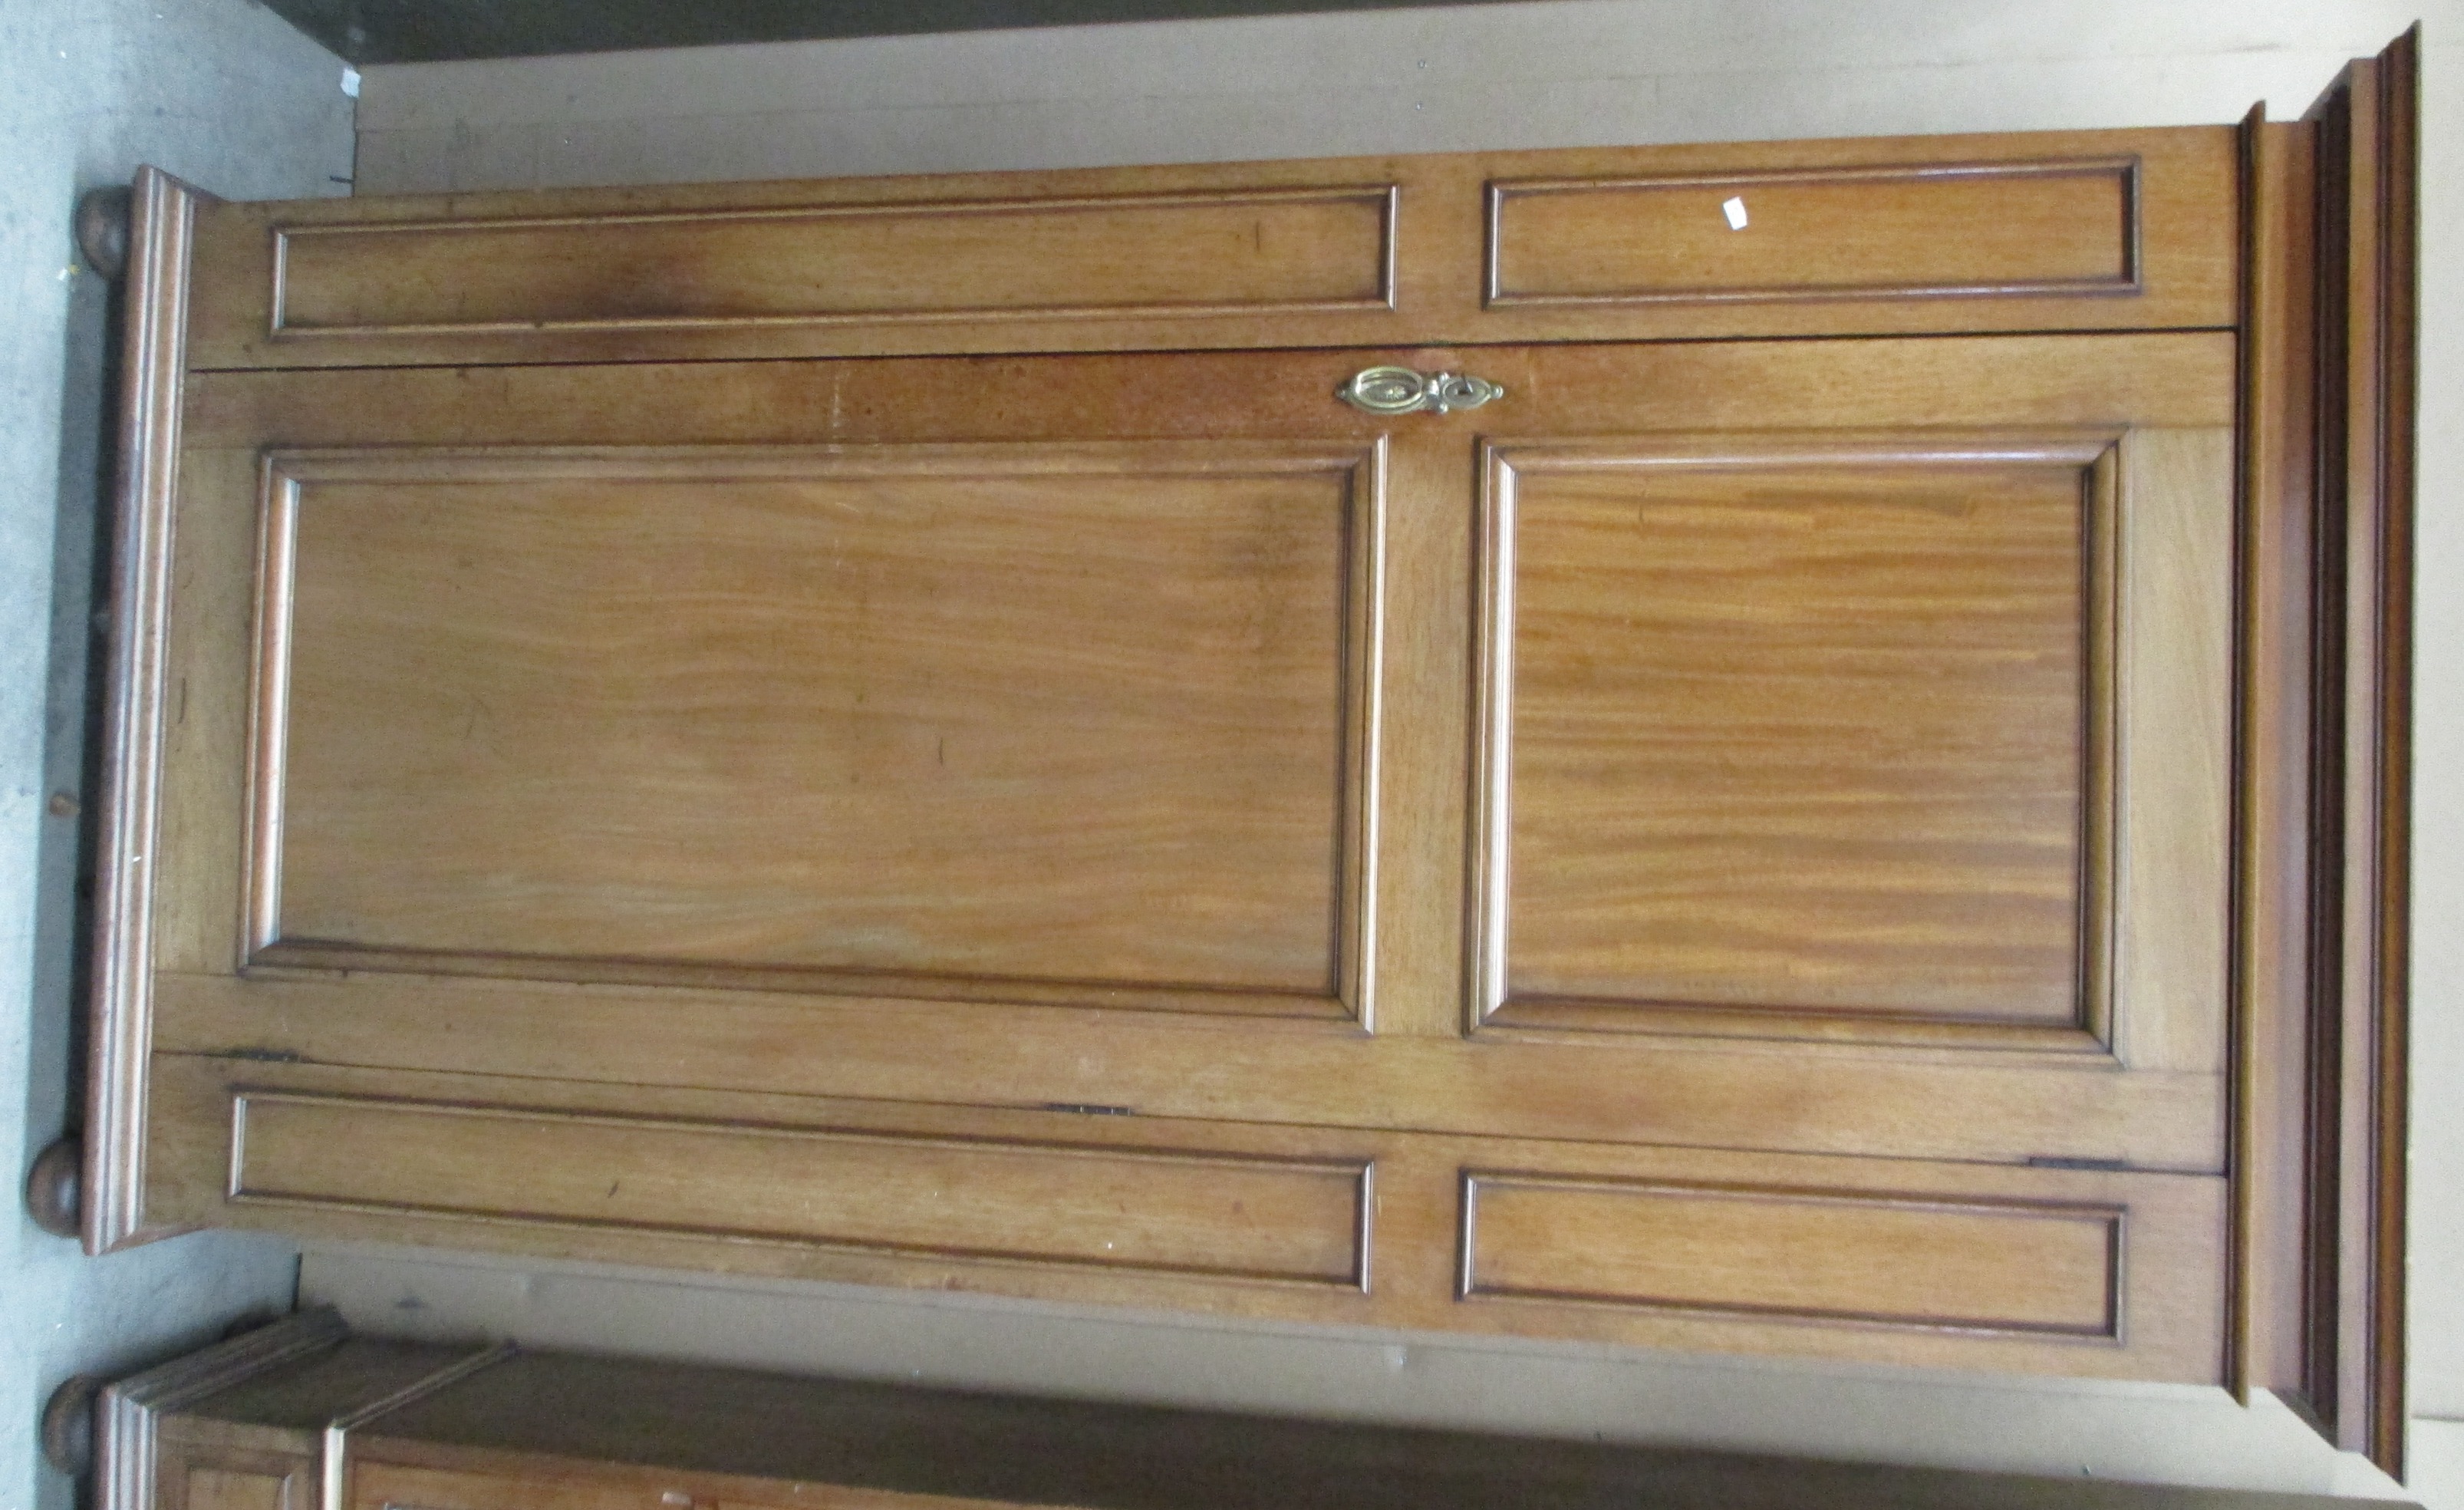 A mahogany hall robe with moulded panel door and sides, on flattened bun feet - 92 cm. - Image 2 of 3